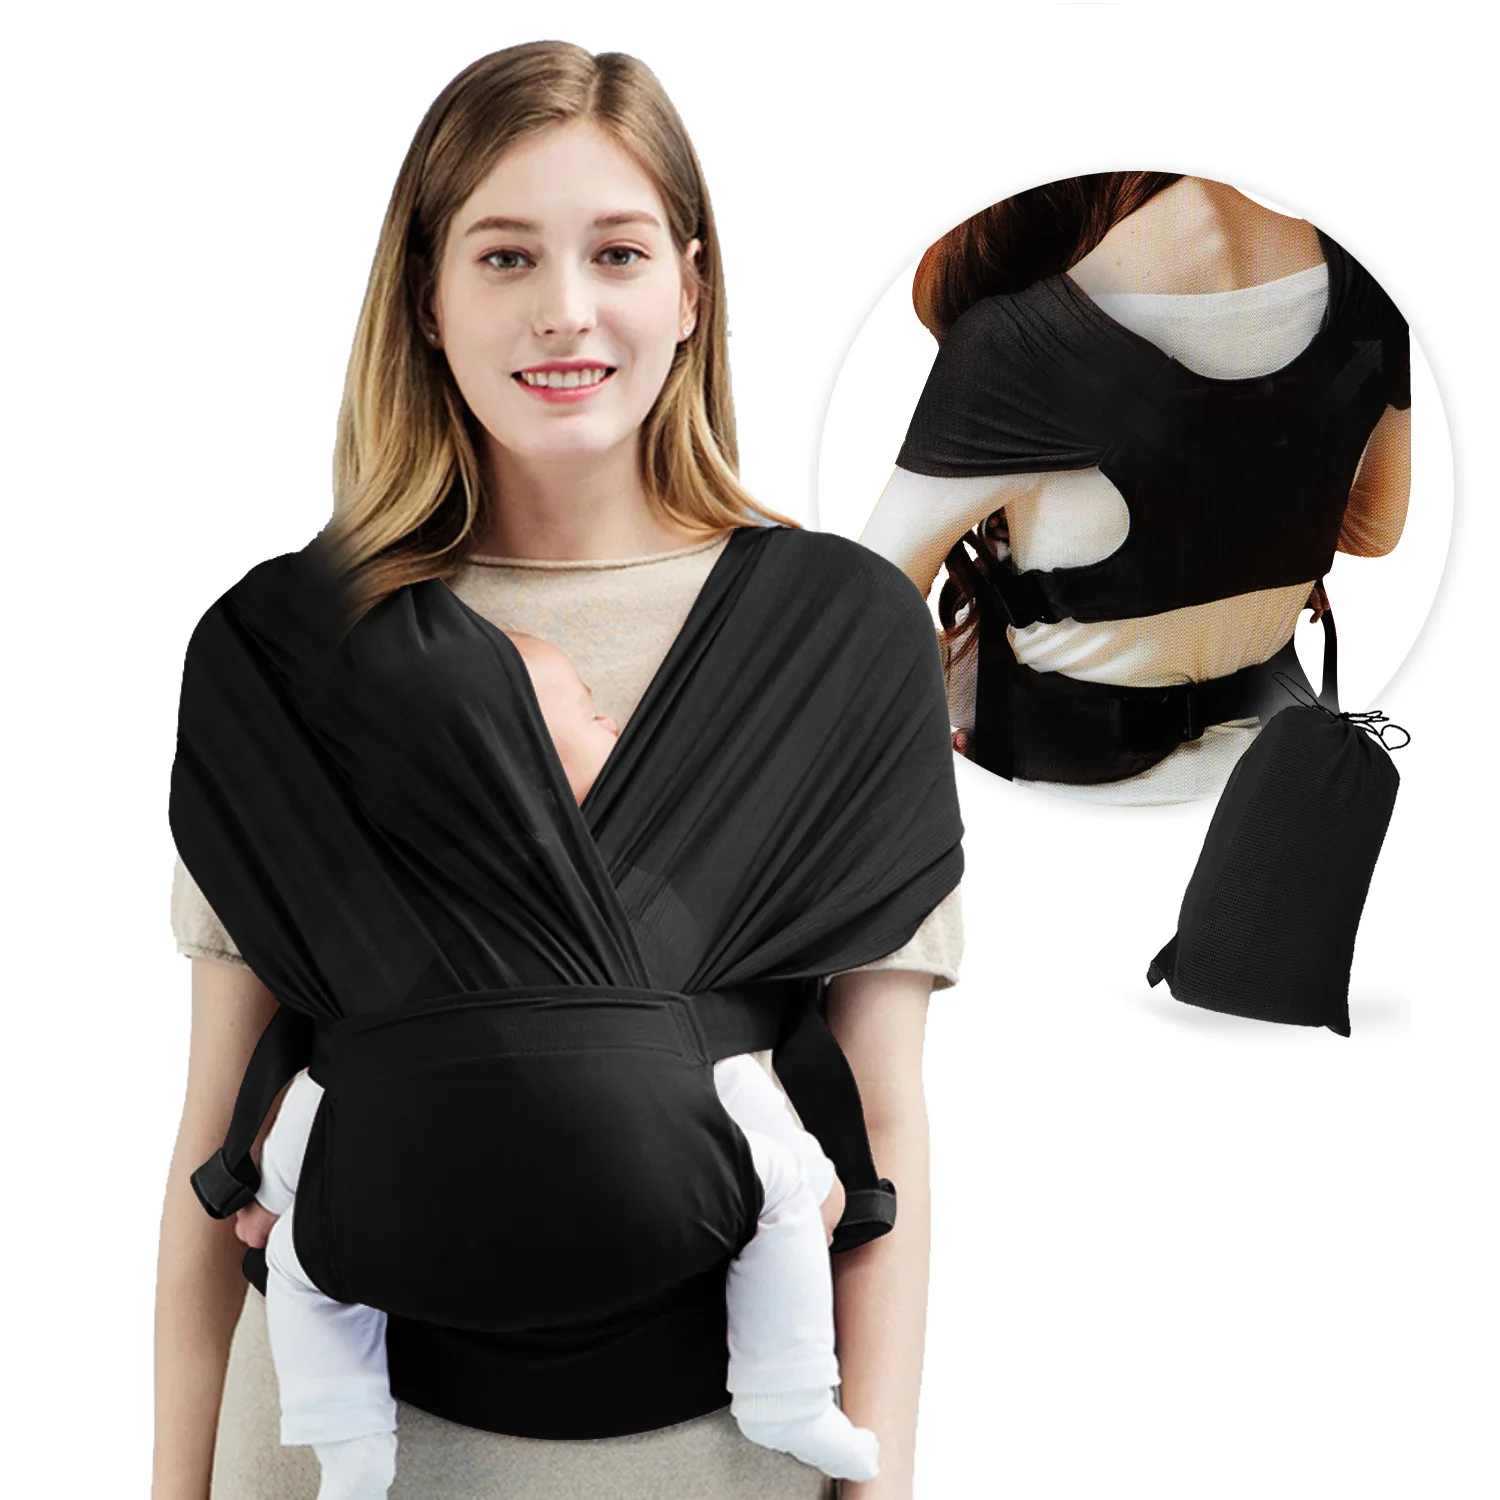 All-in-1 Stretchy Baby Wraps Baby Sling Infant Carrier Nursing Cover Hands Free Baby Wrap X Baby Carrier Great Baby Shower Gift